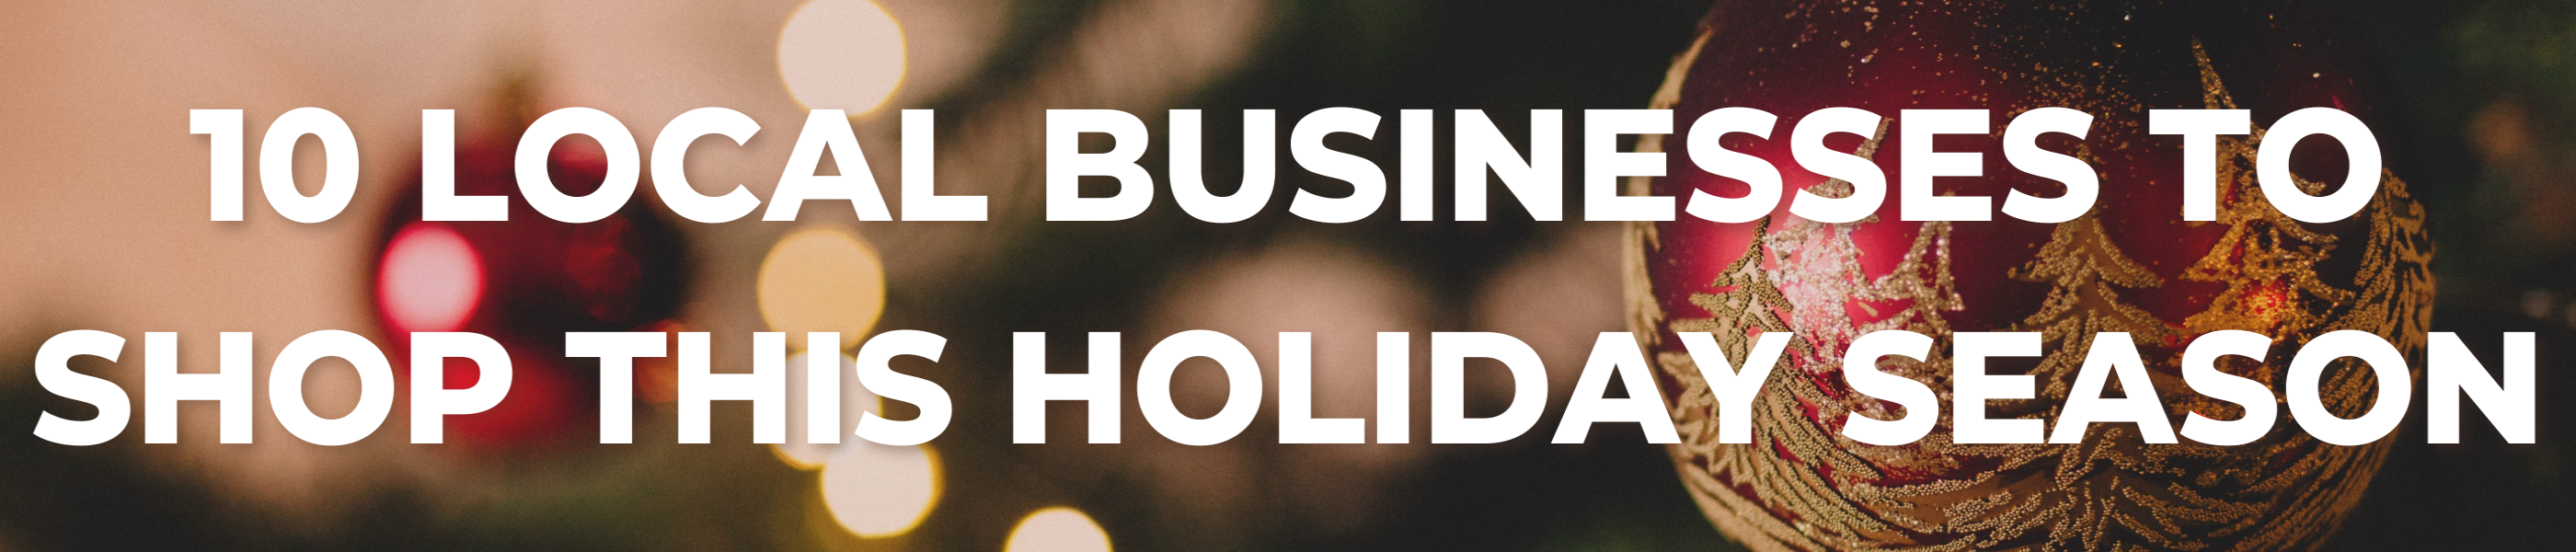 10 Businesses to Shop This Holiday Season Header